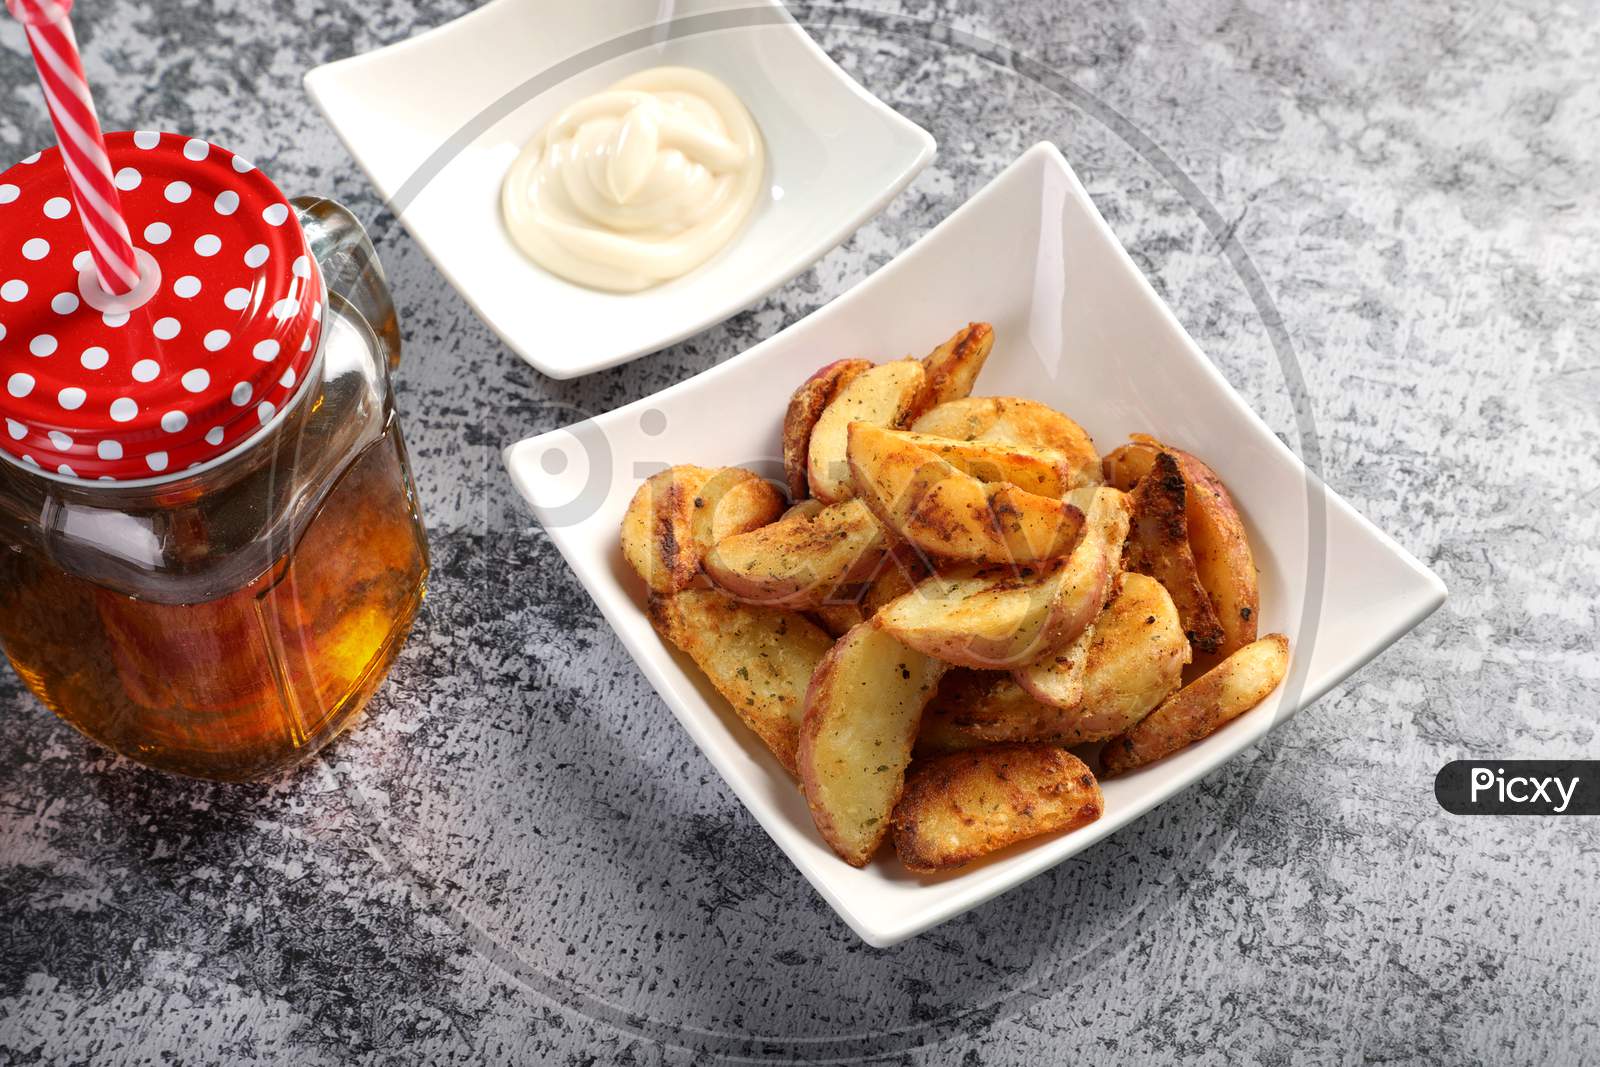 Potato Wedges With Apple Juice / Cold Drink And Mayonnaise Sauce